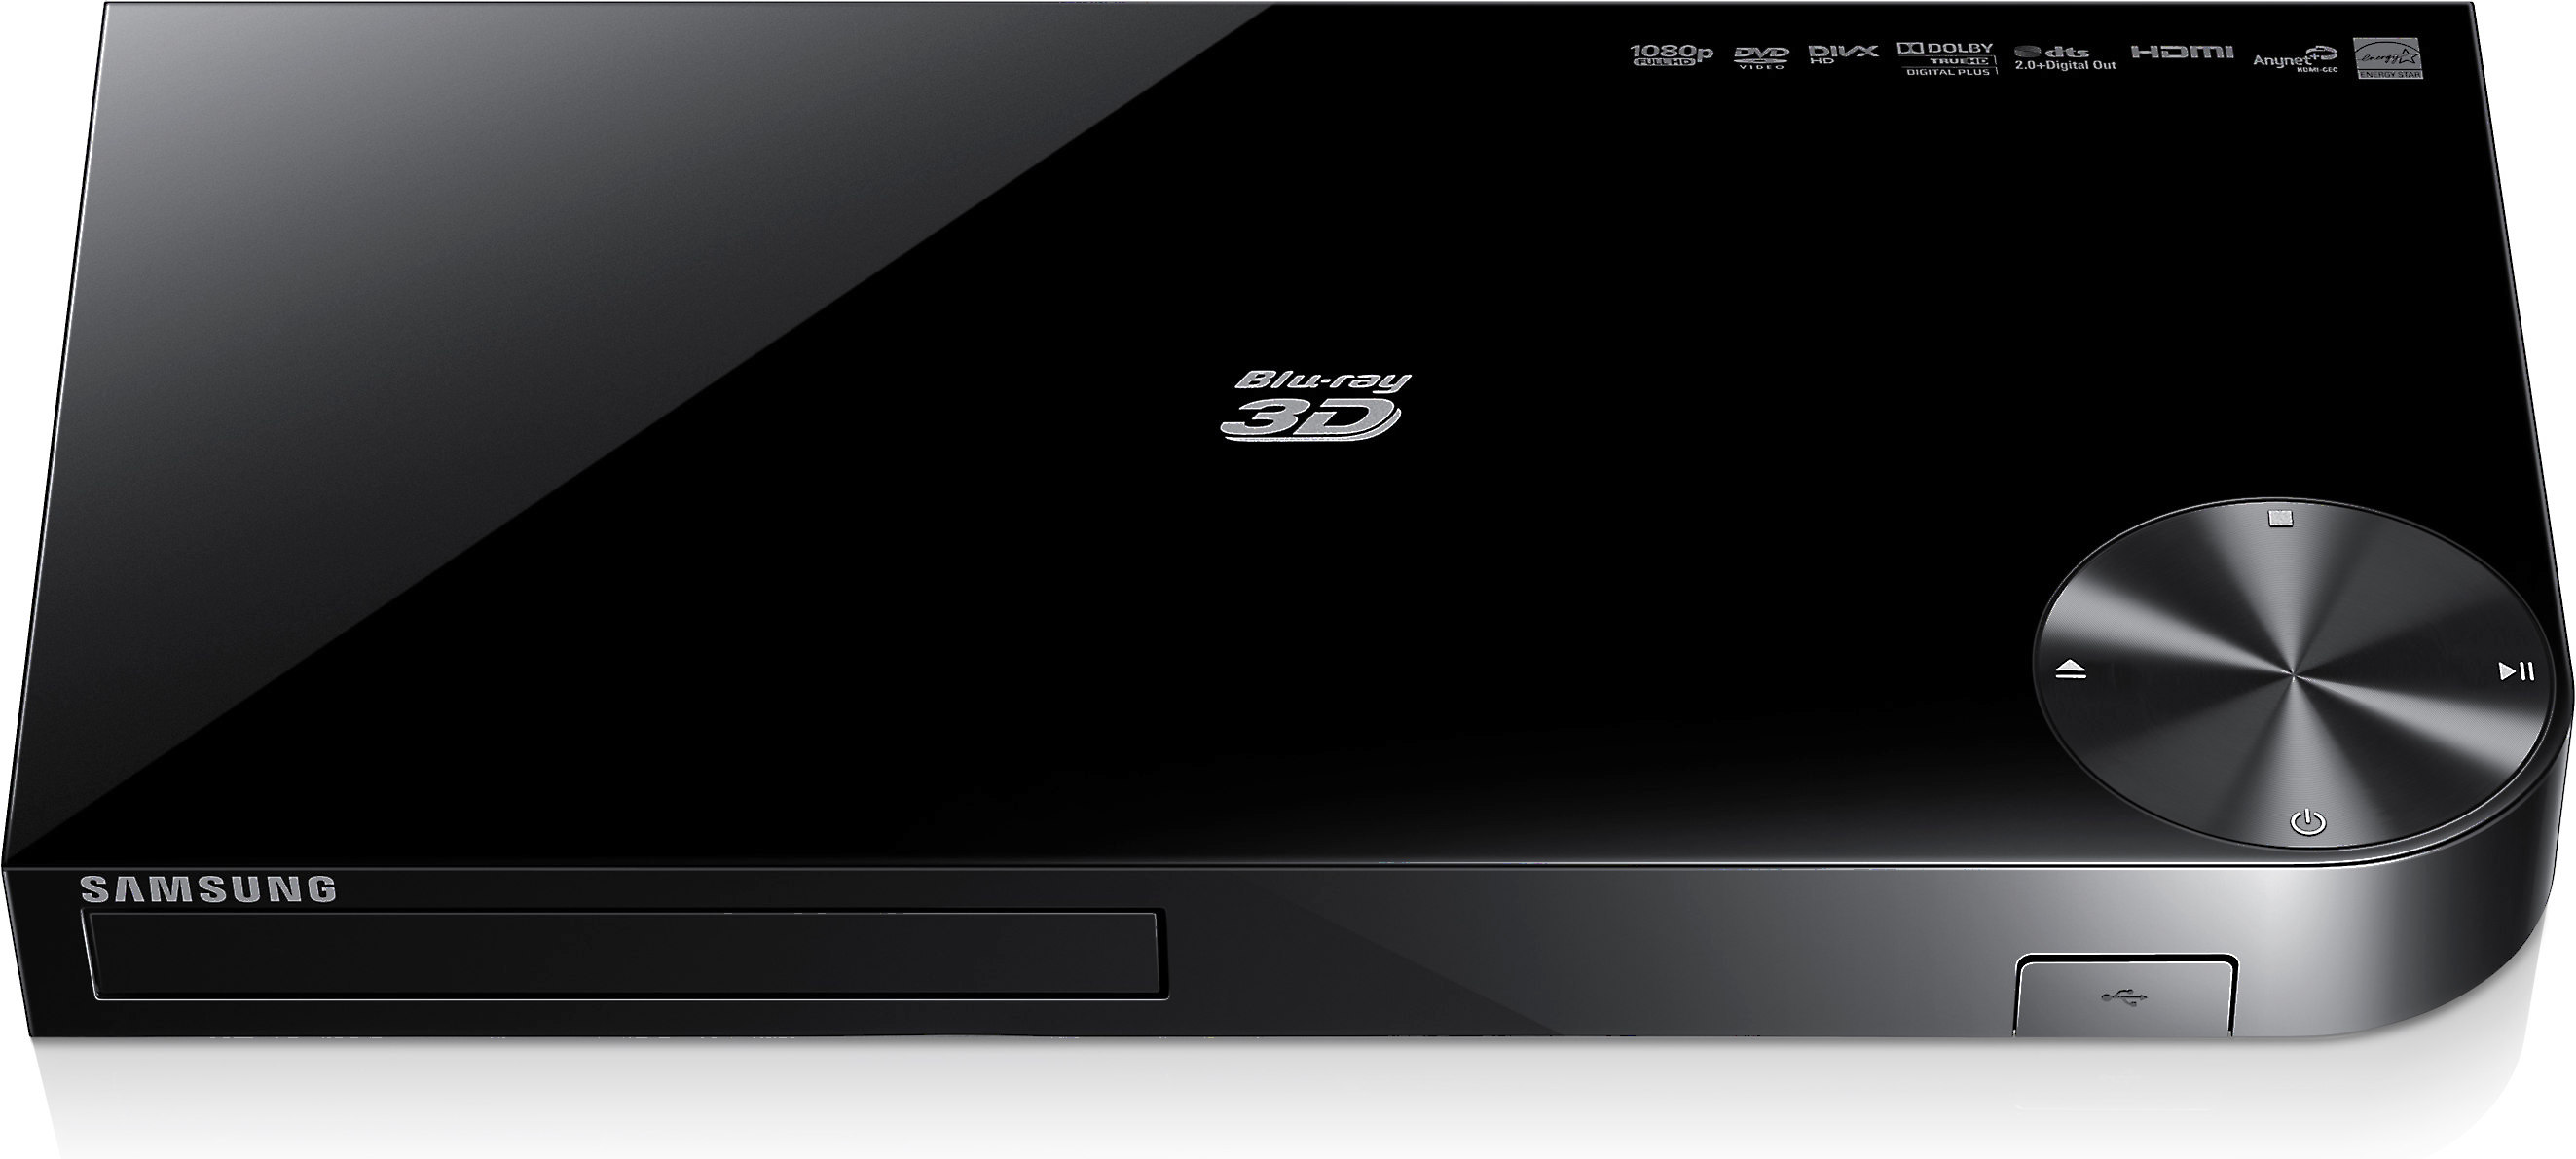 Samsung H6500 3d Blu Ray Player With 4k Upscaling And Wi Fi At Crutchfield